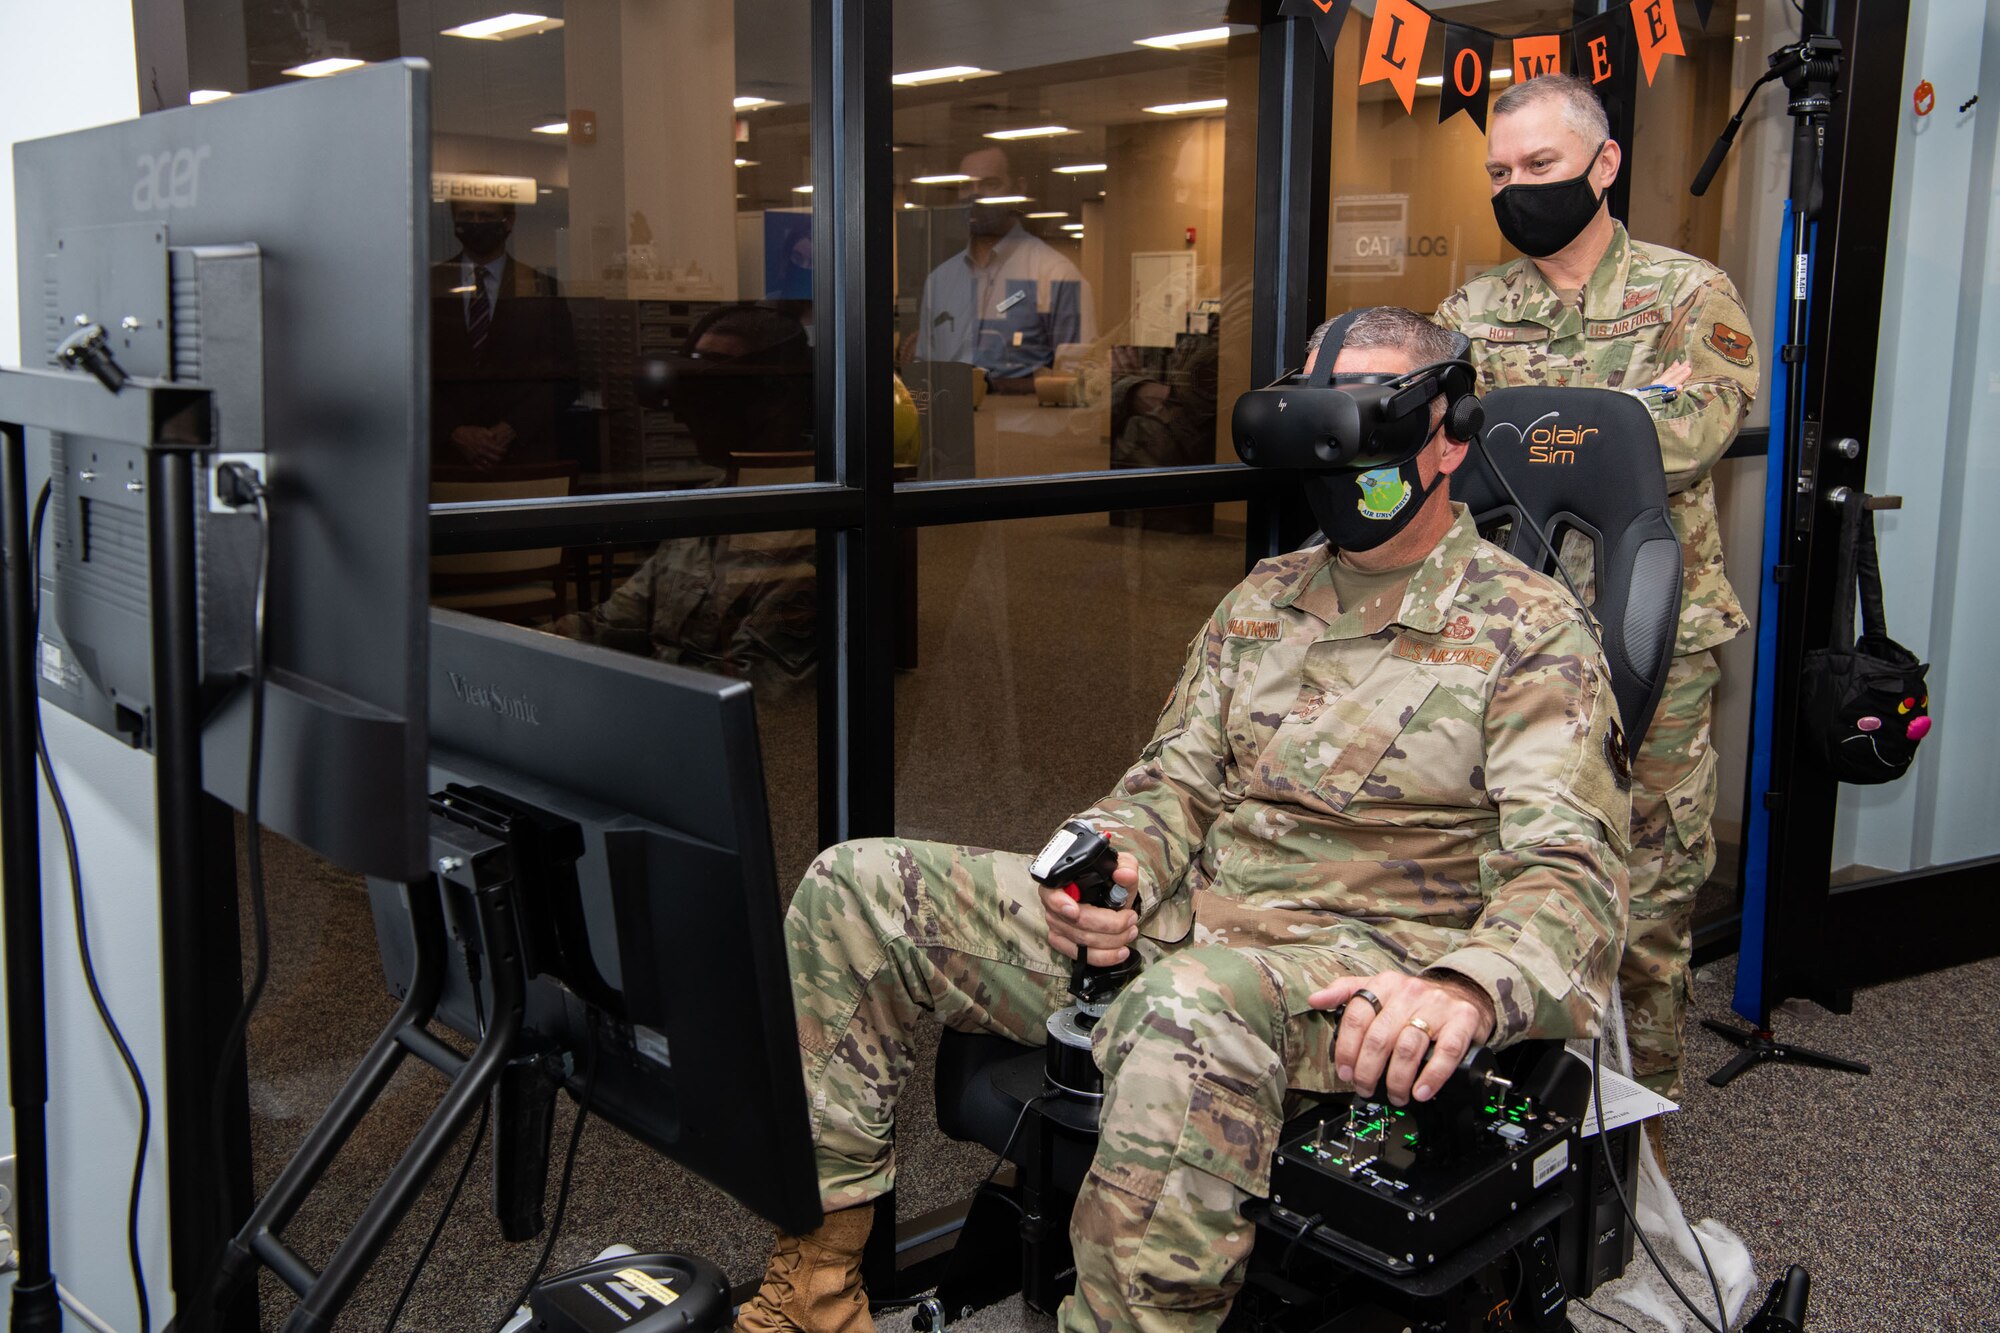 Air University Library and Immersive Learning and Simulation Research Task Force host a ribbon cutting for the new Pilot Training NEXT simulator October 28th 2021 in the Library’s Innovation Lab. (U.S. Air Force photo by William Birchfield)